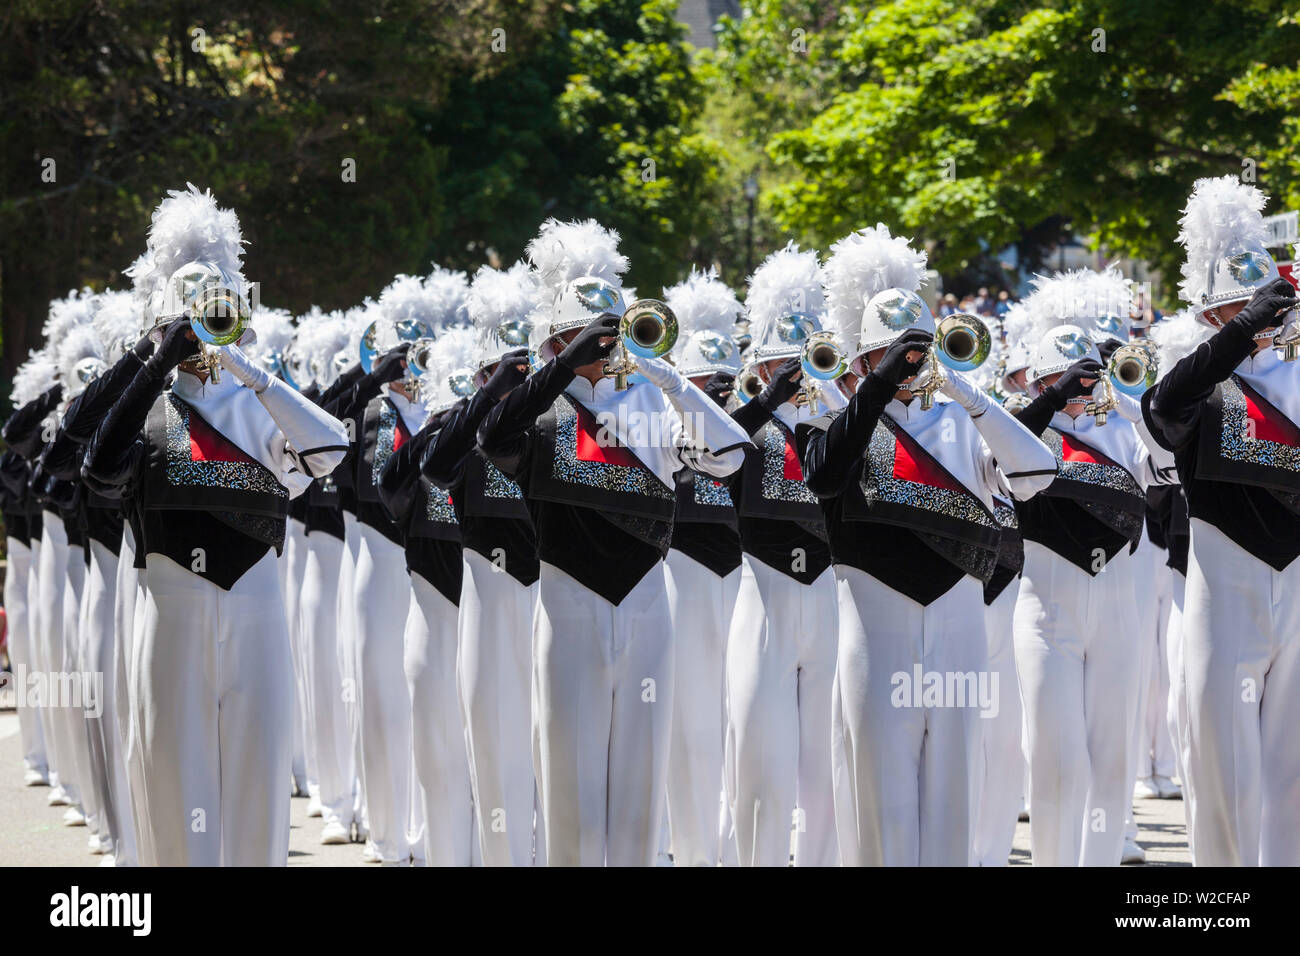 USA, Massachusetts, Manchester By The Sea, Fourth of July, marching band Stock Photo